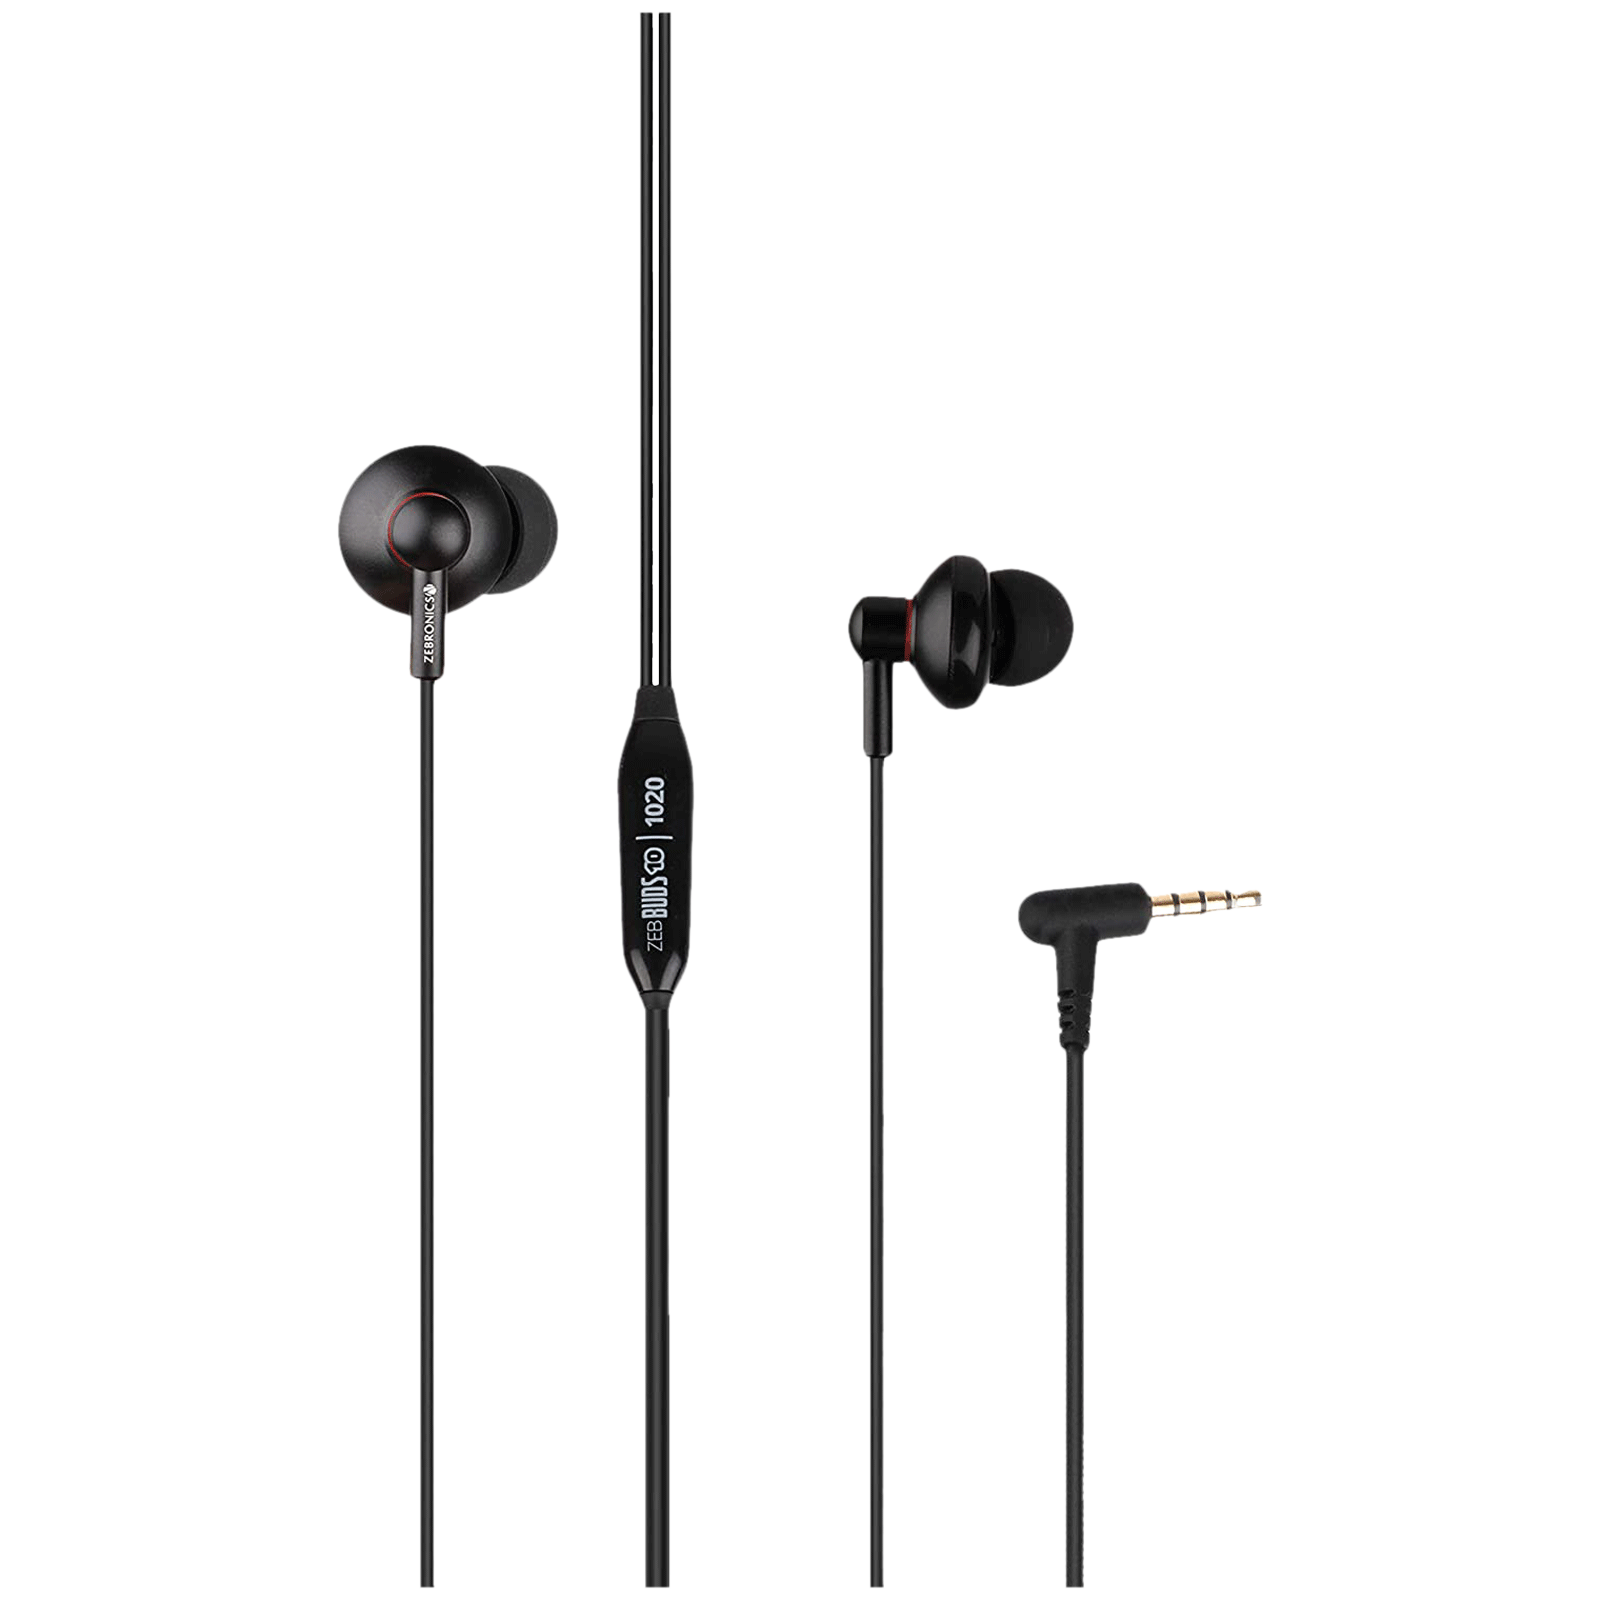 ZEBRONICS Buds 10 Wired Earphone with Mic (In Ear, Black)